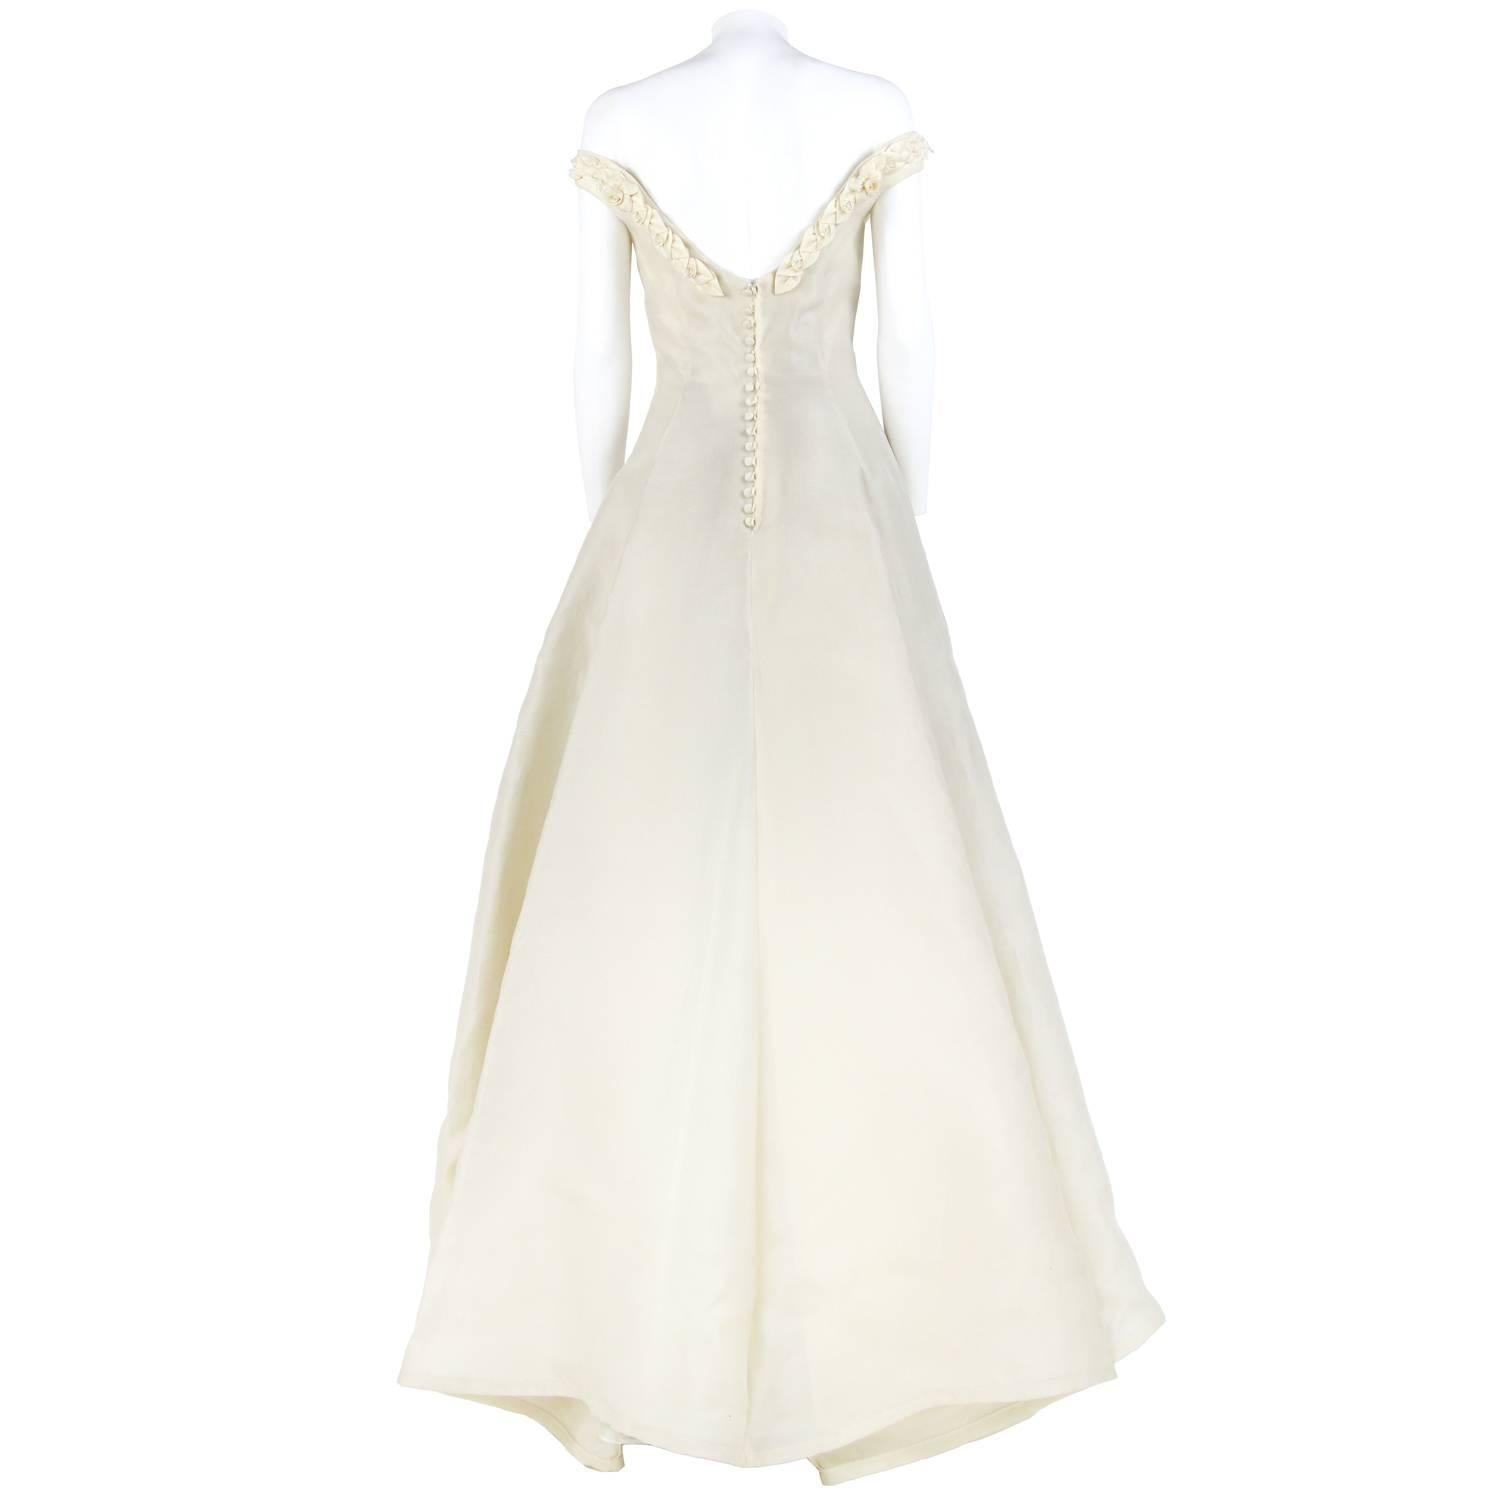 Princess dress Atelier Aimée Haute Couture Montenapoleone in ivory silk. It features a wide off-the-shoulders neckline decorated with silk roses, and a wide flared skirt. Buttons closure on the back. The item is vintage, it was produced in the 2000s